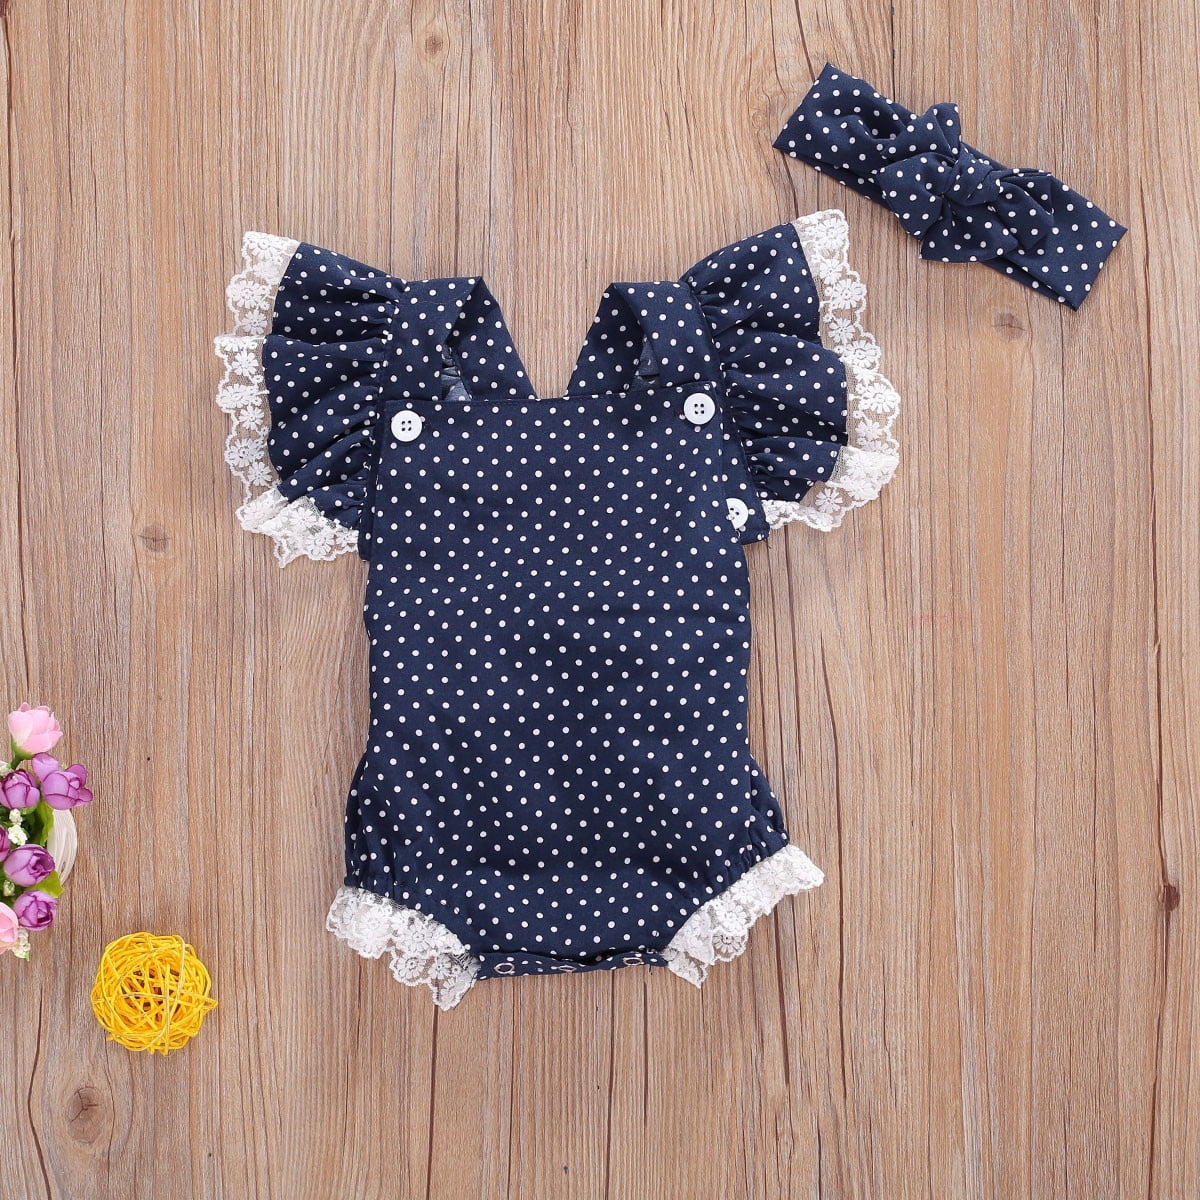 Toddler Infant Baby Girls Ruffles Sleeve Romper Playsuit Clothes Outfits Clothes